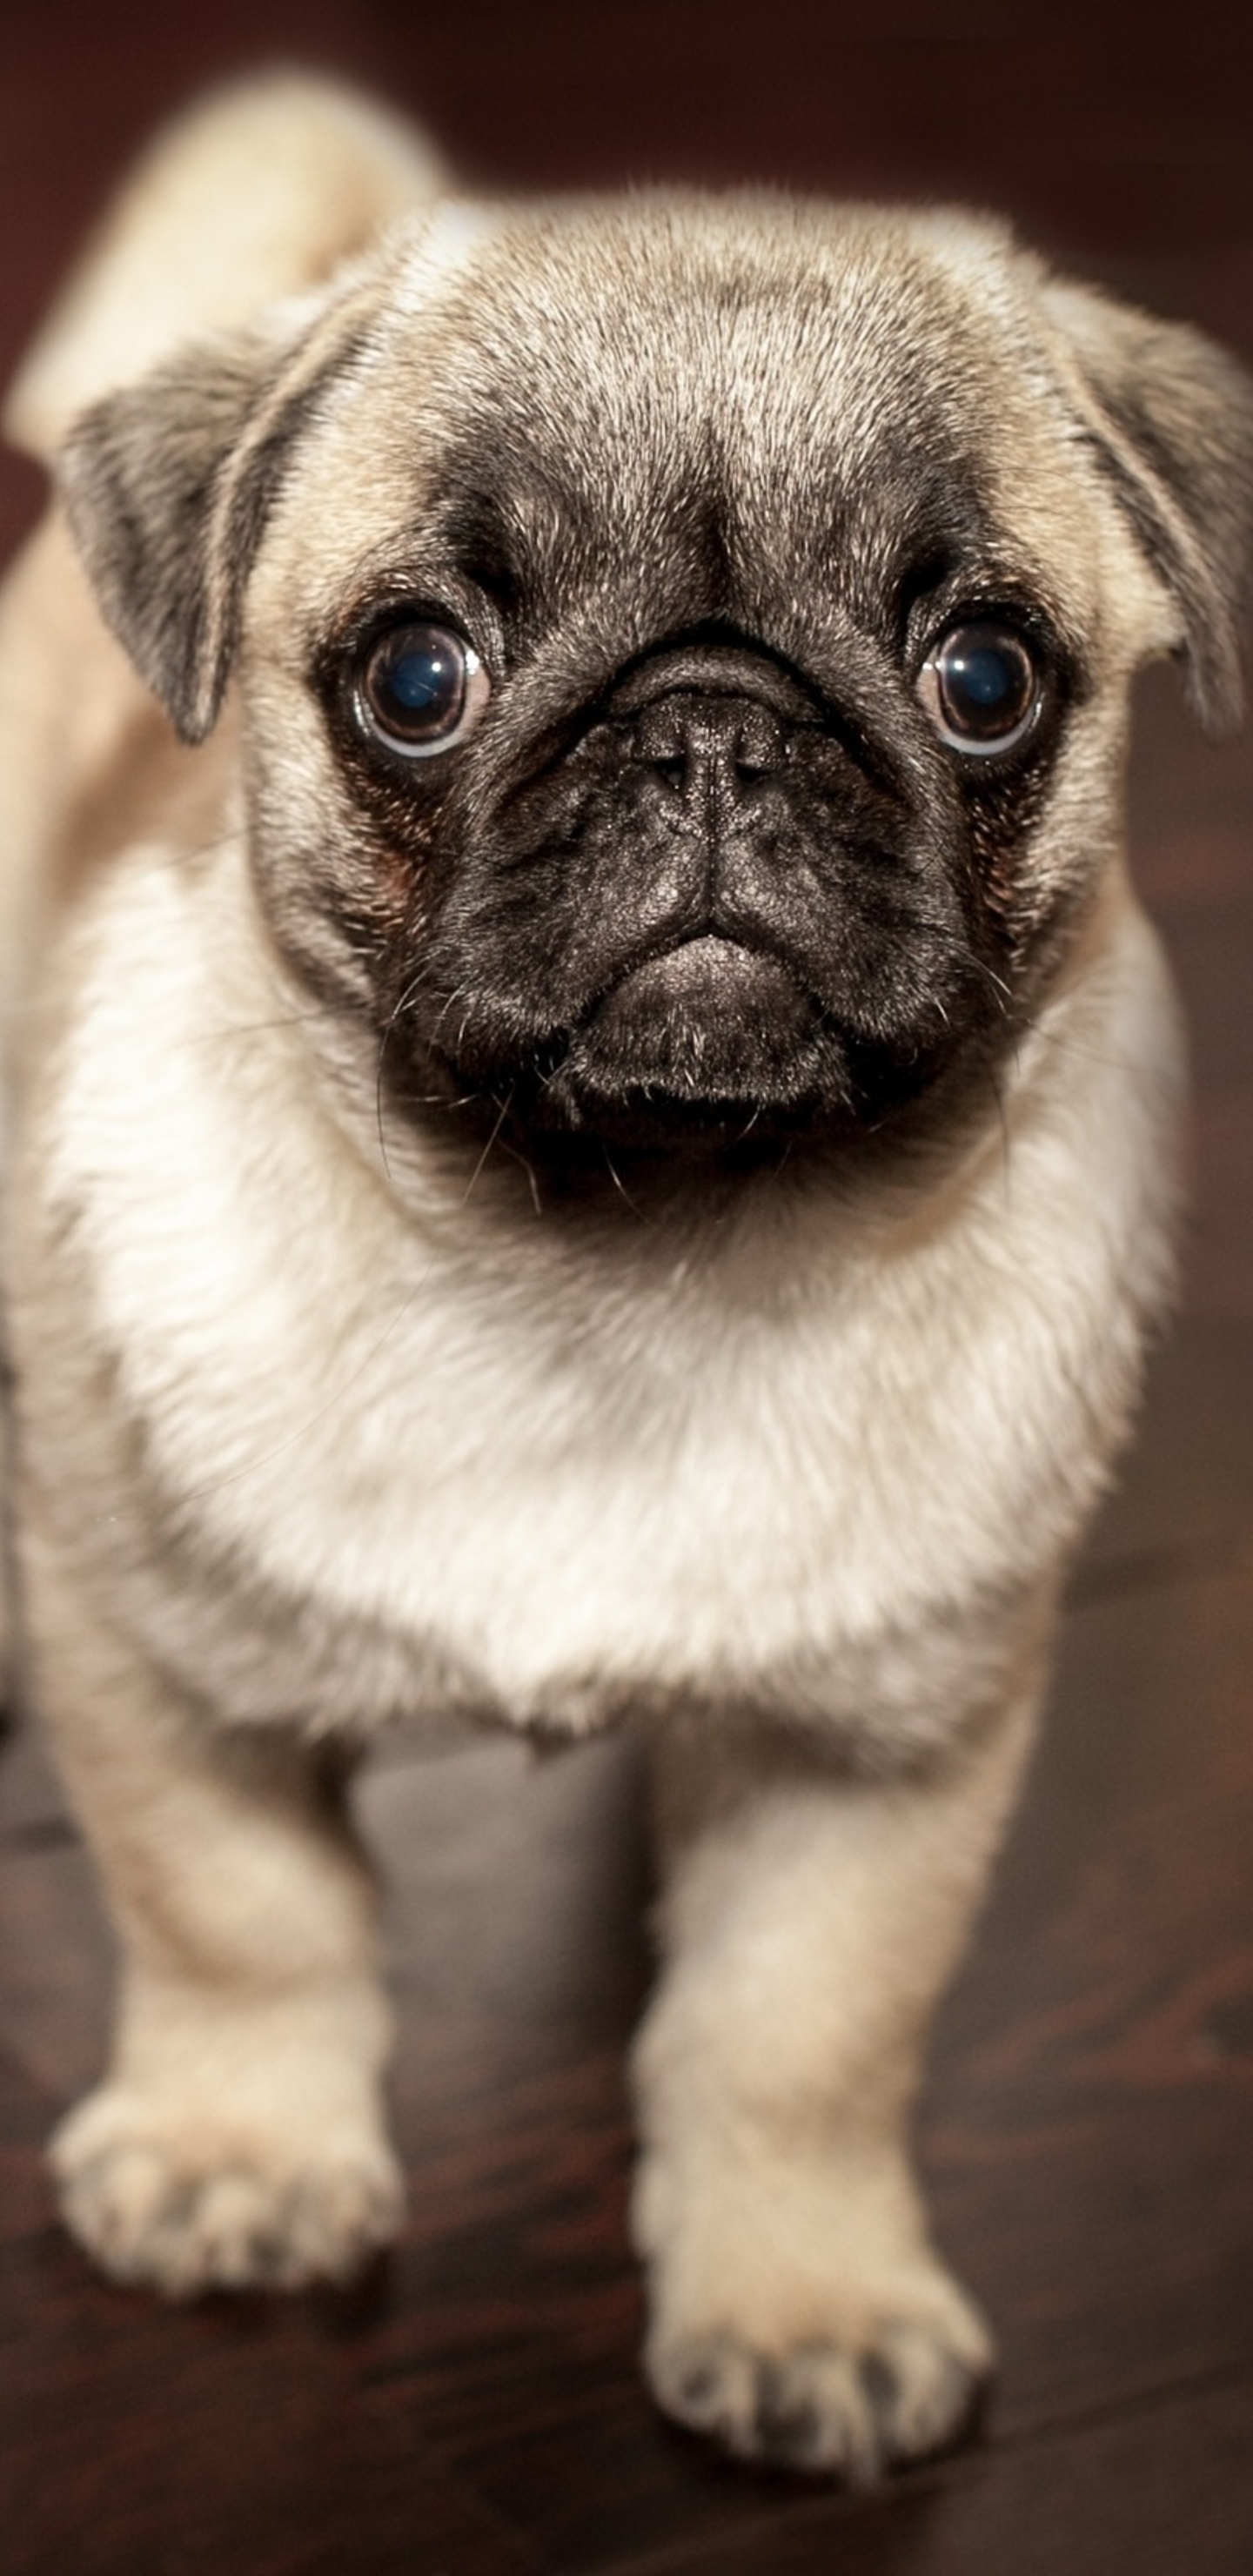 1440x2960 Pug Puppy Samsung Galaxy Note 9,8, S9,S8,S8+ QHD HD 4k Wallpapers, Images, Backgrounds, Photos and Pictures